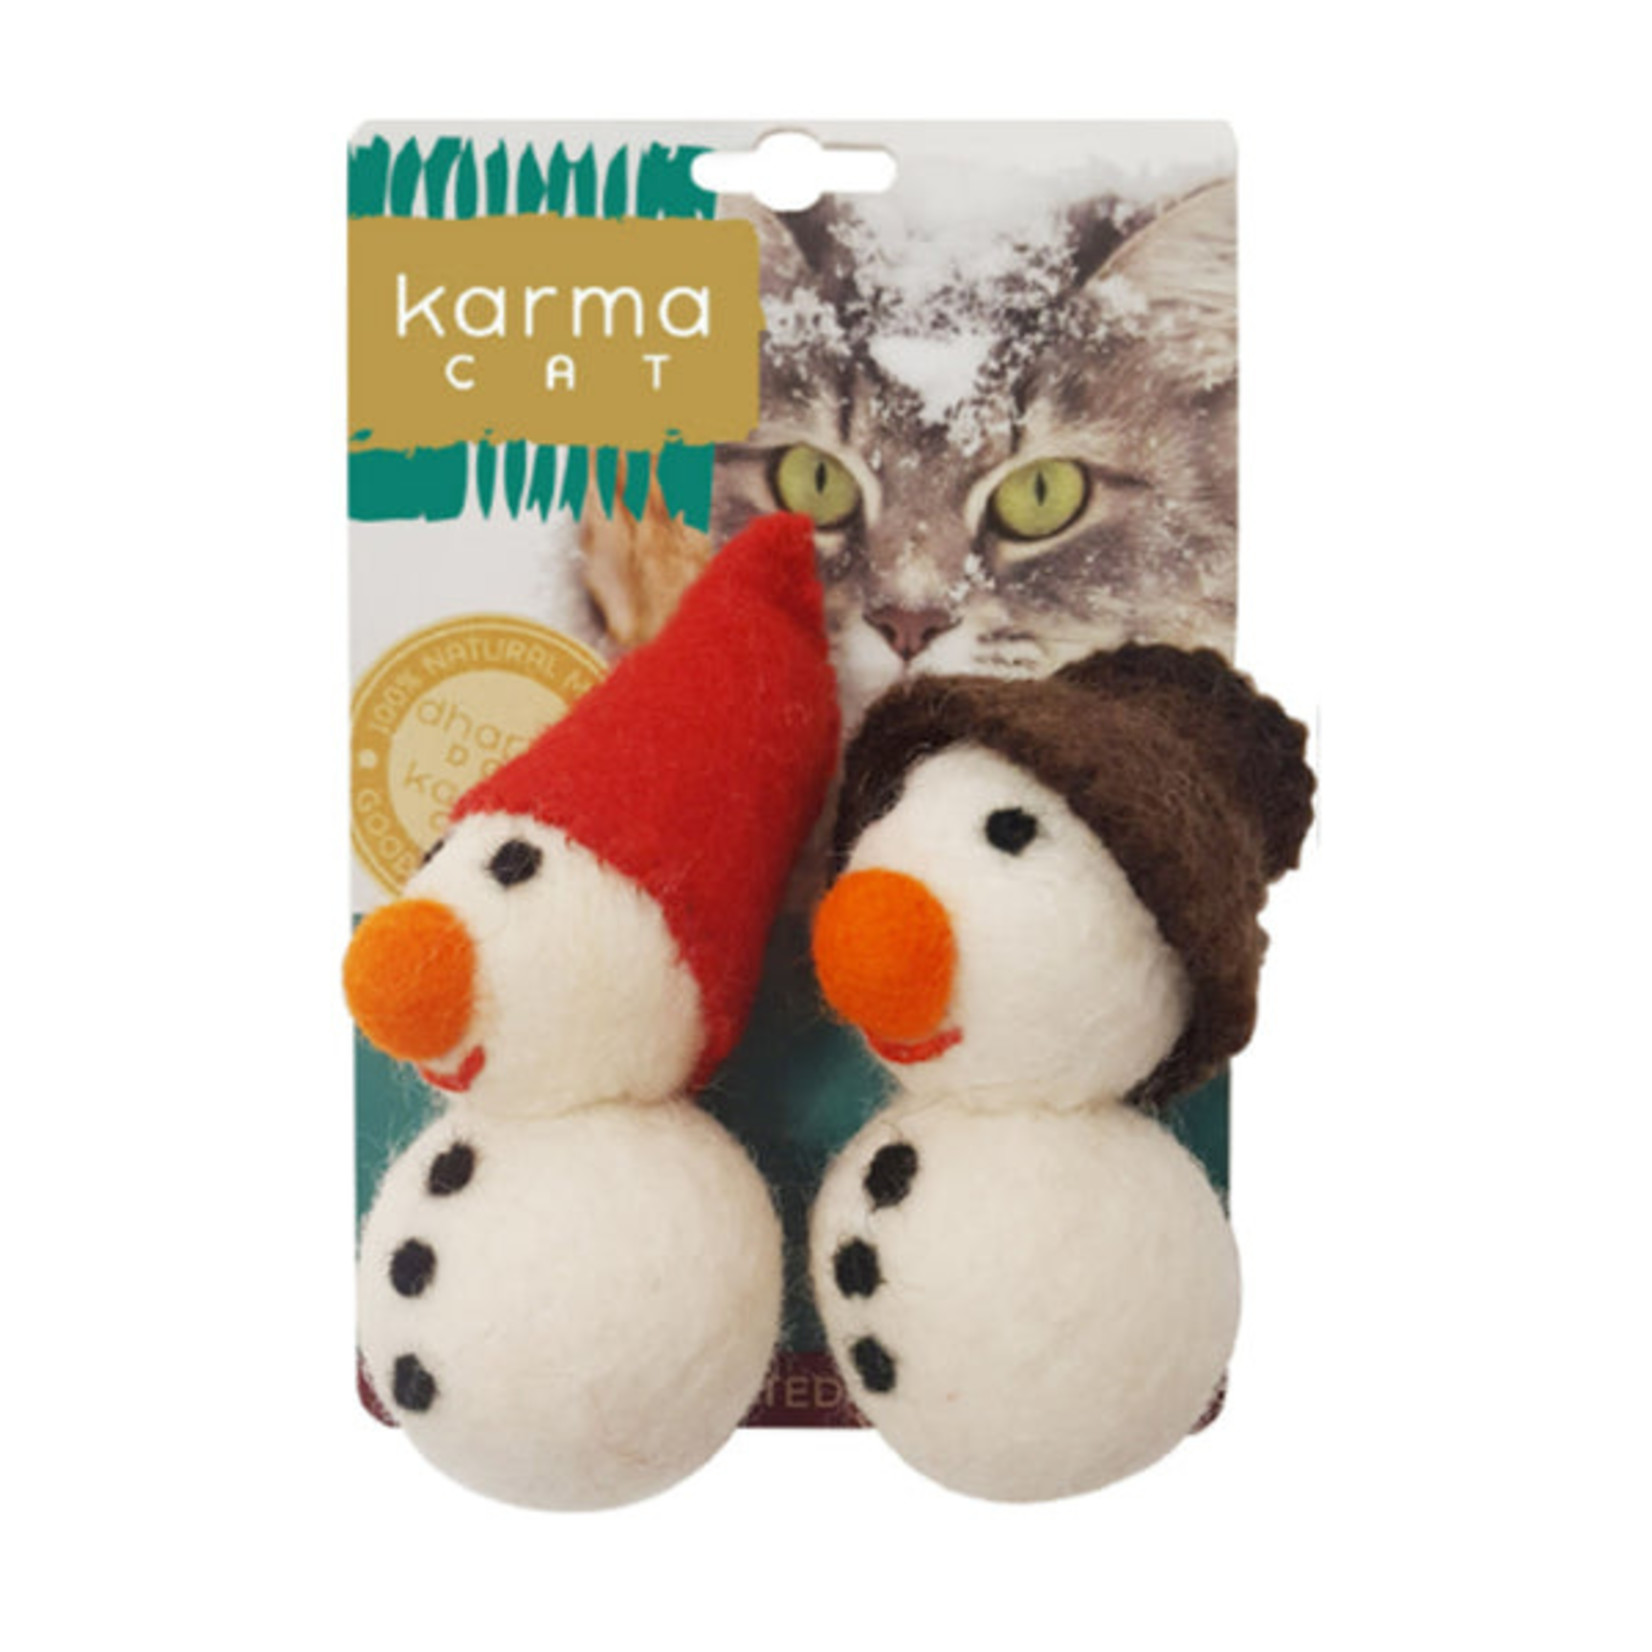 Dharma Dog Karma Cat Dharma Dog Karma Cat SNOWMAN Pack of 2 Cat Toy